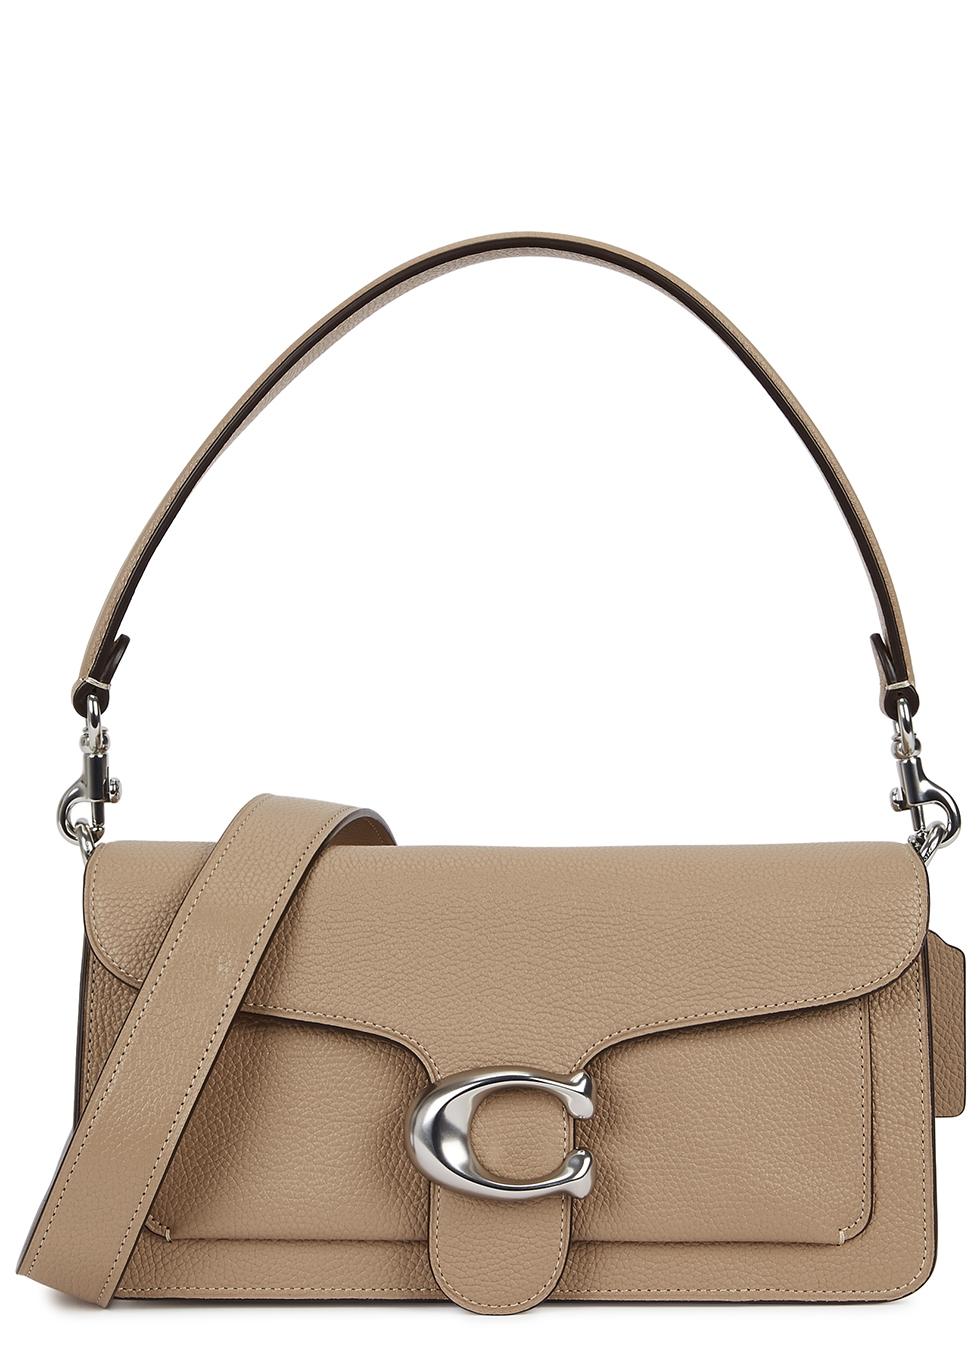 COACH Tabby 26 Taupe Leather Shoulder Bag | Lyst